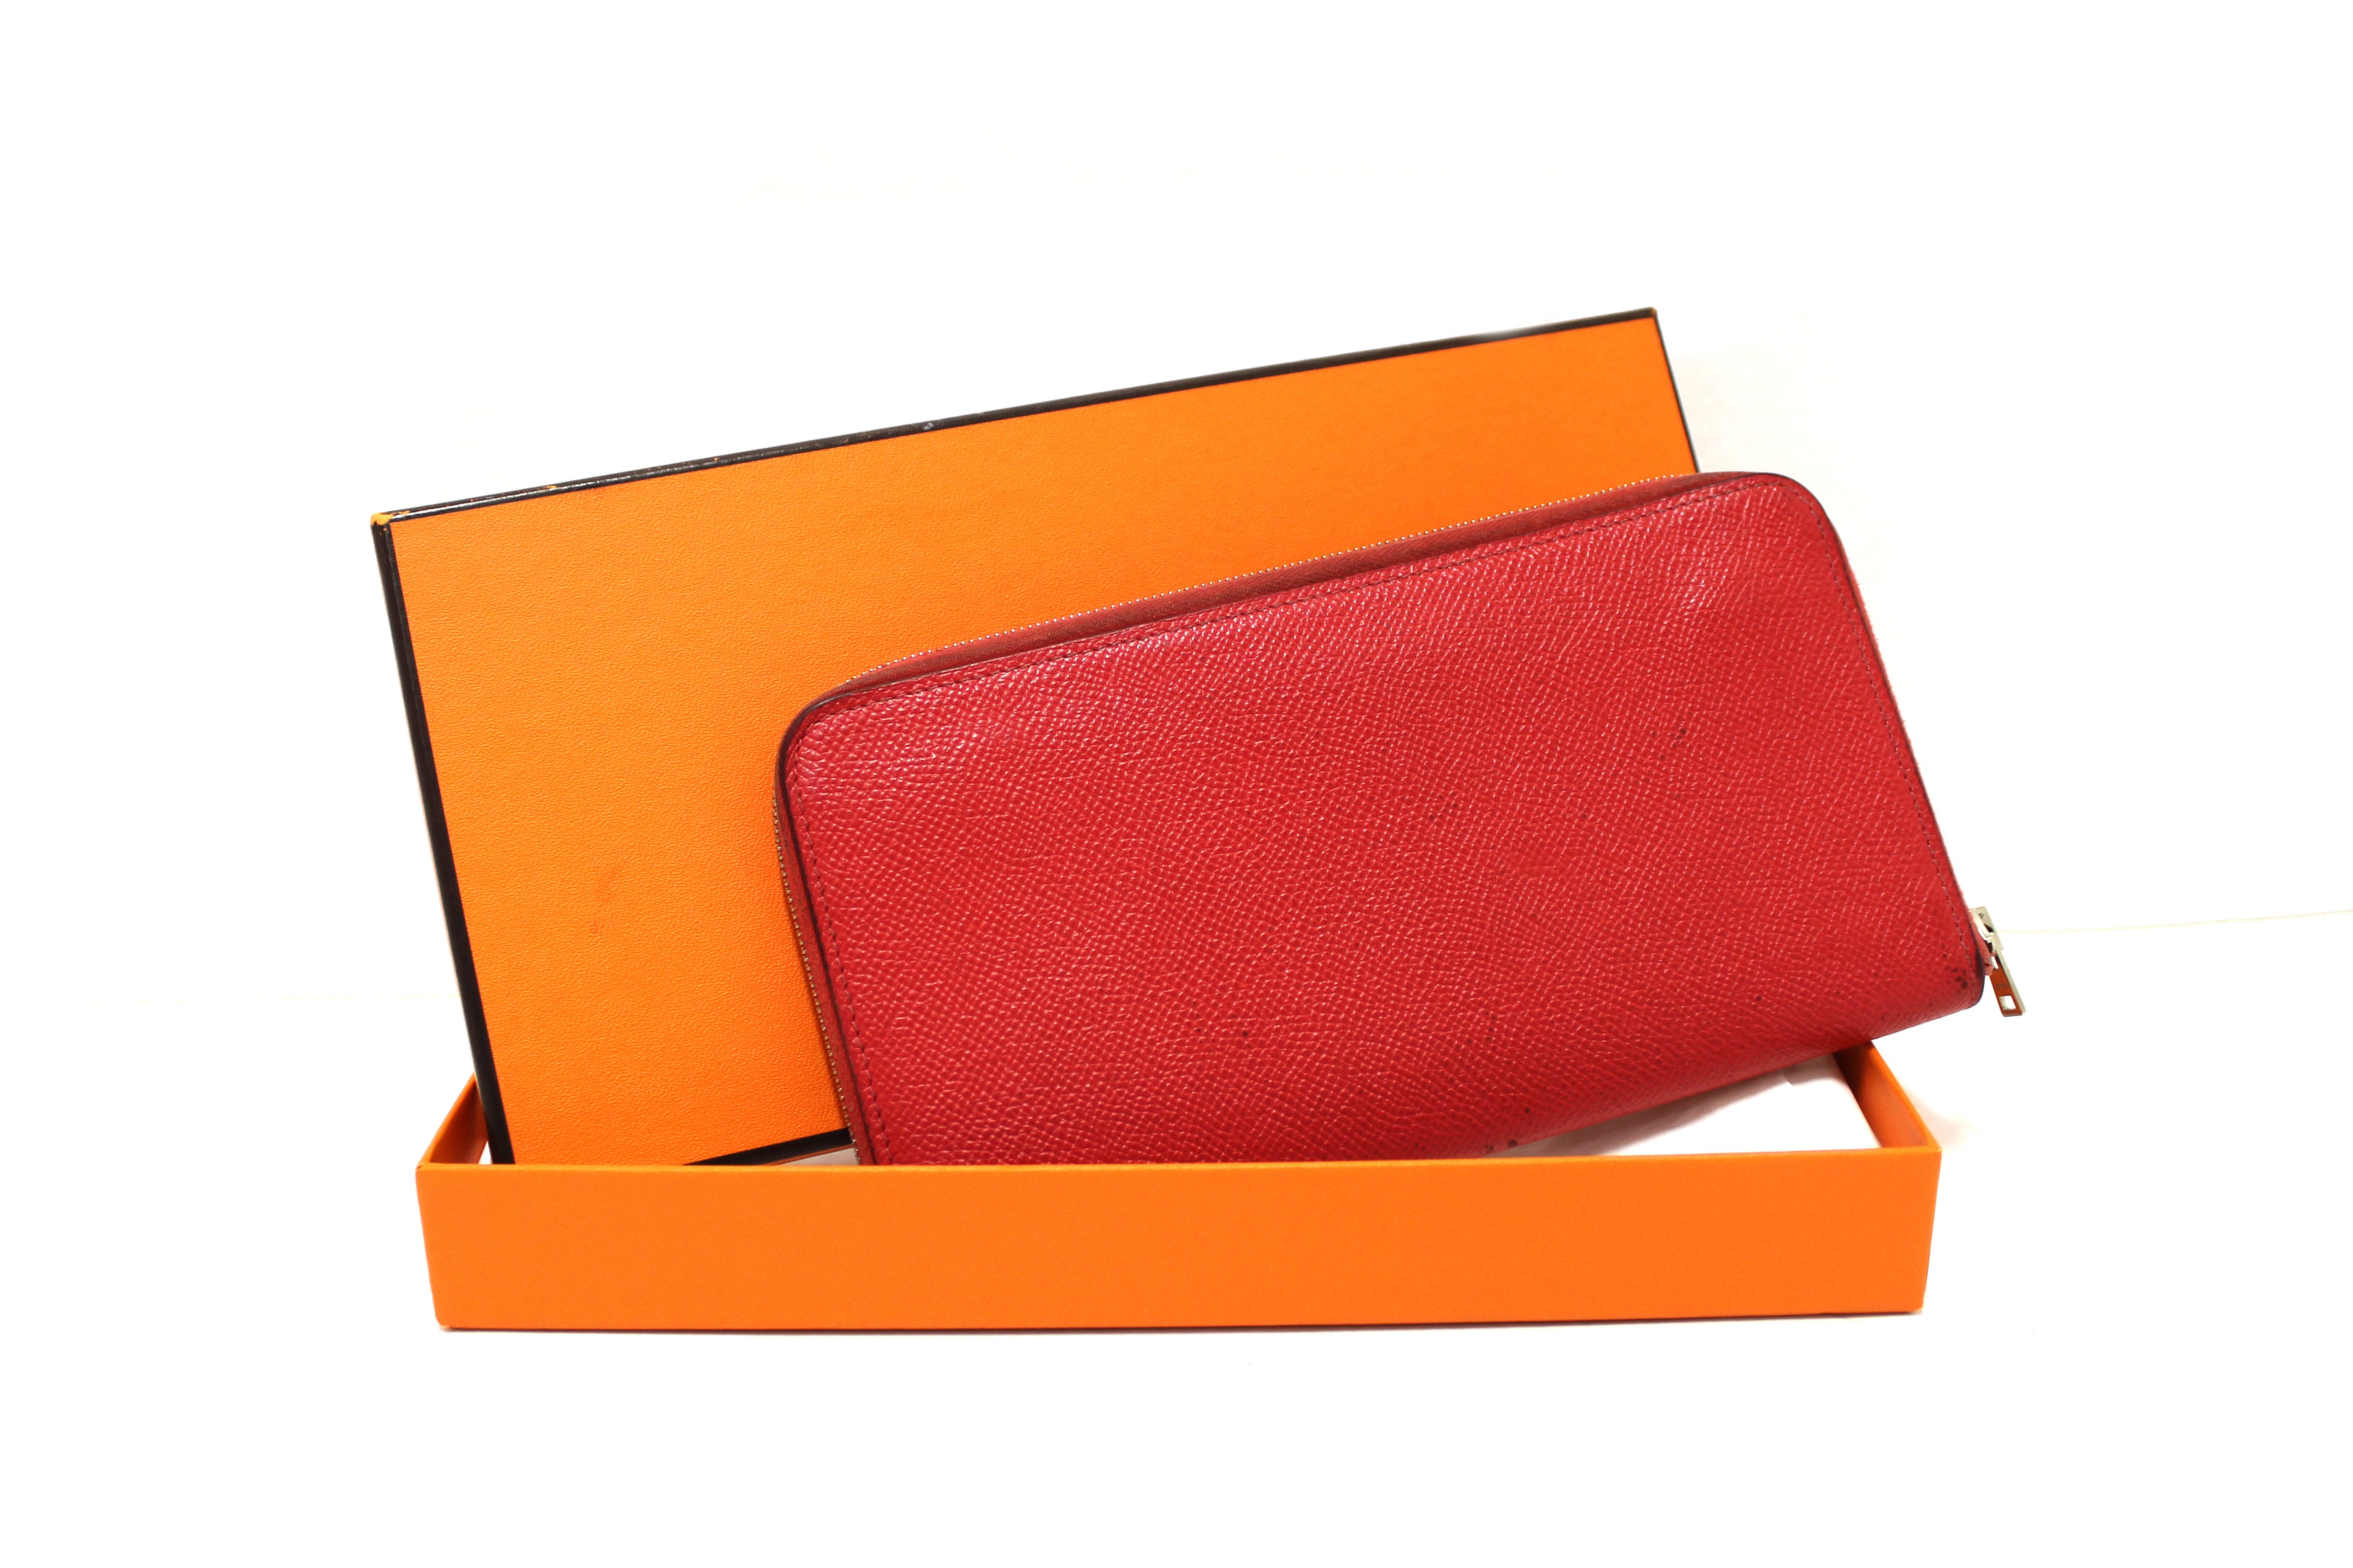 Authentic Hermes Red Epsom Leather Azap Silk'In Classic Long Wallet